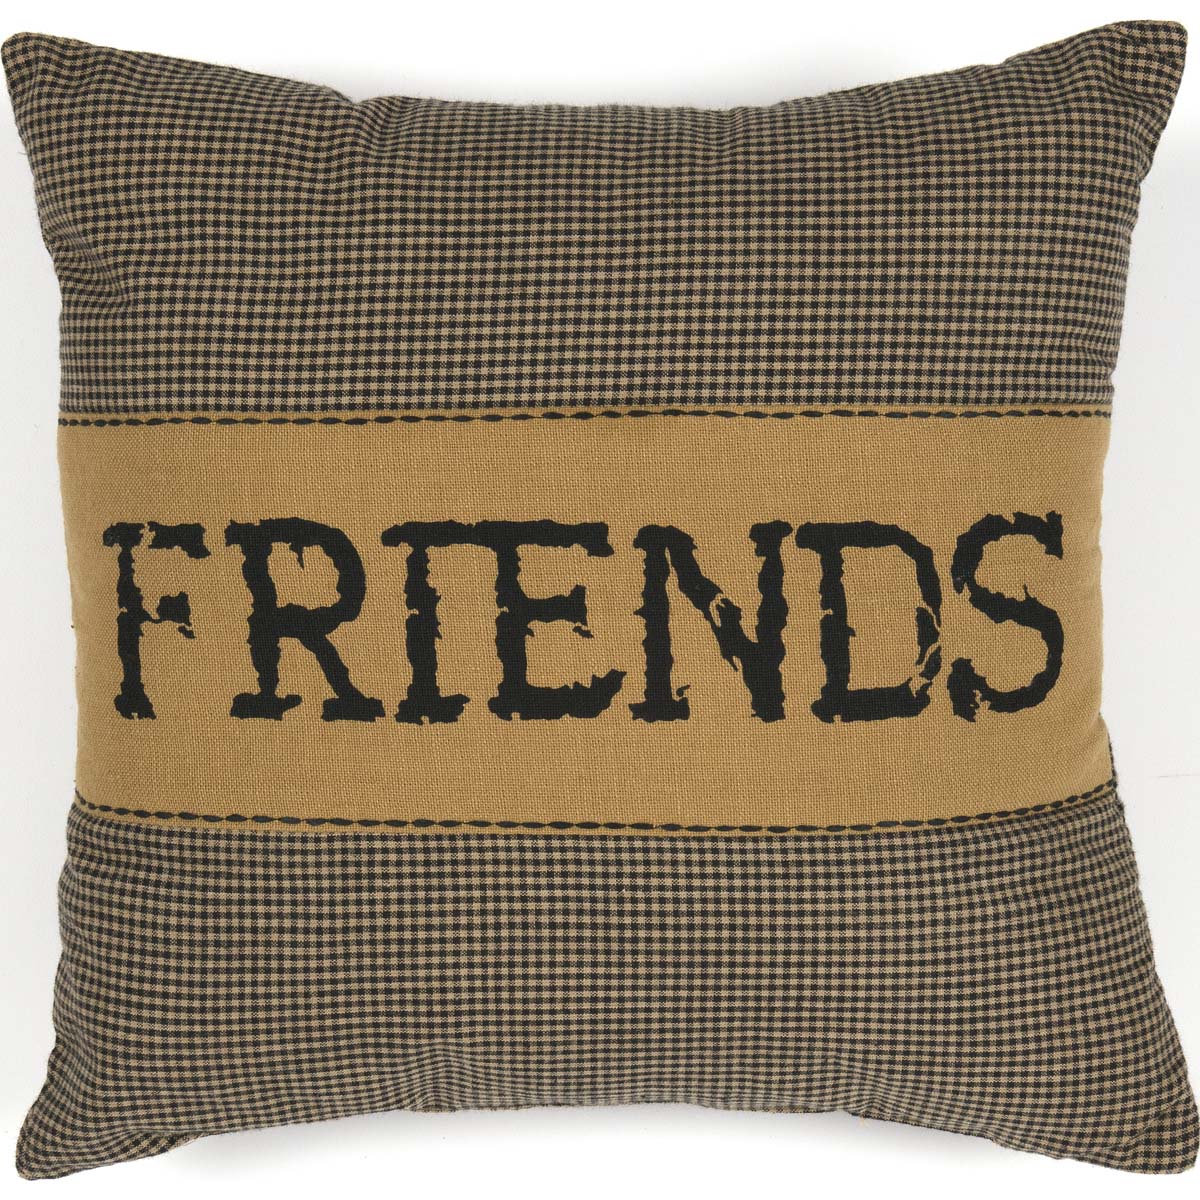 34238-Heritage-Farms-Friends-Pillow-12x12-image-4